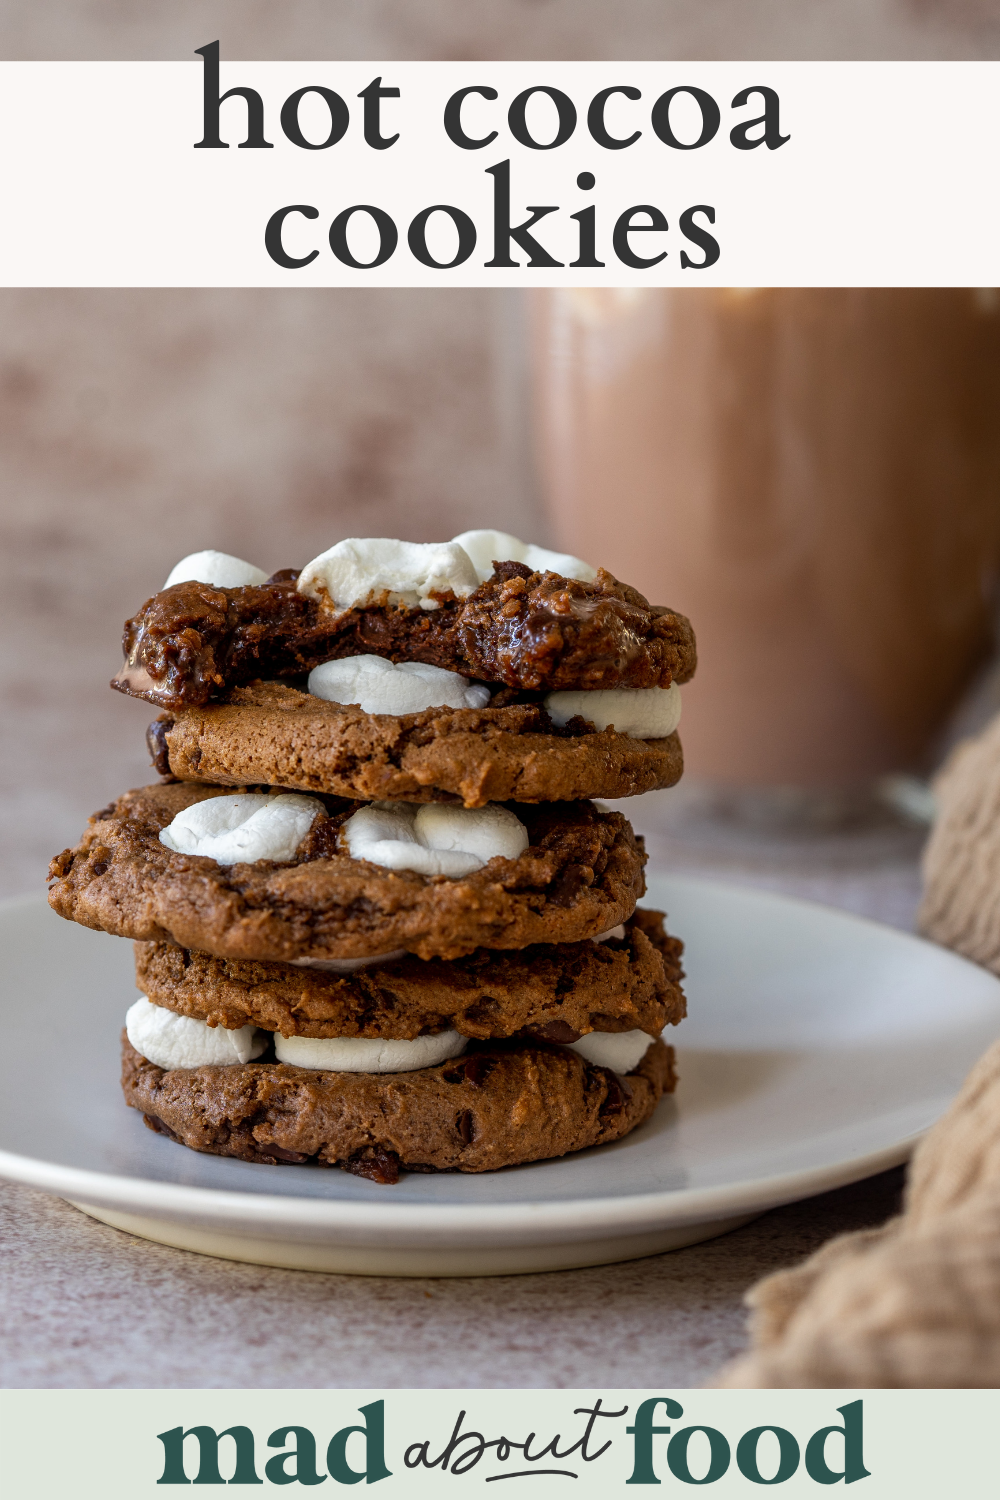 Image for pinning Hot Cocoa Cookies recipe on Pinterest